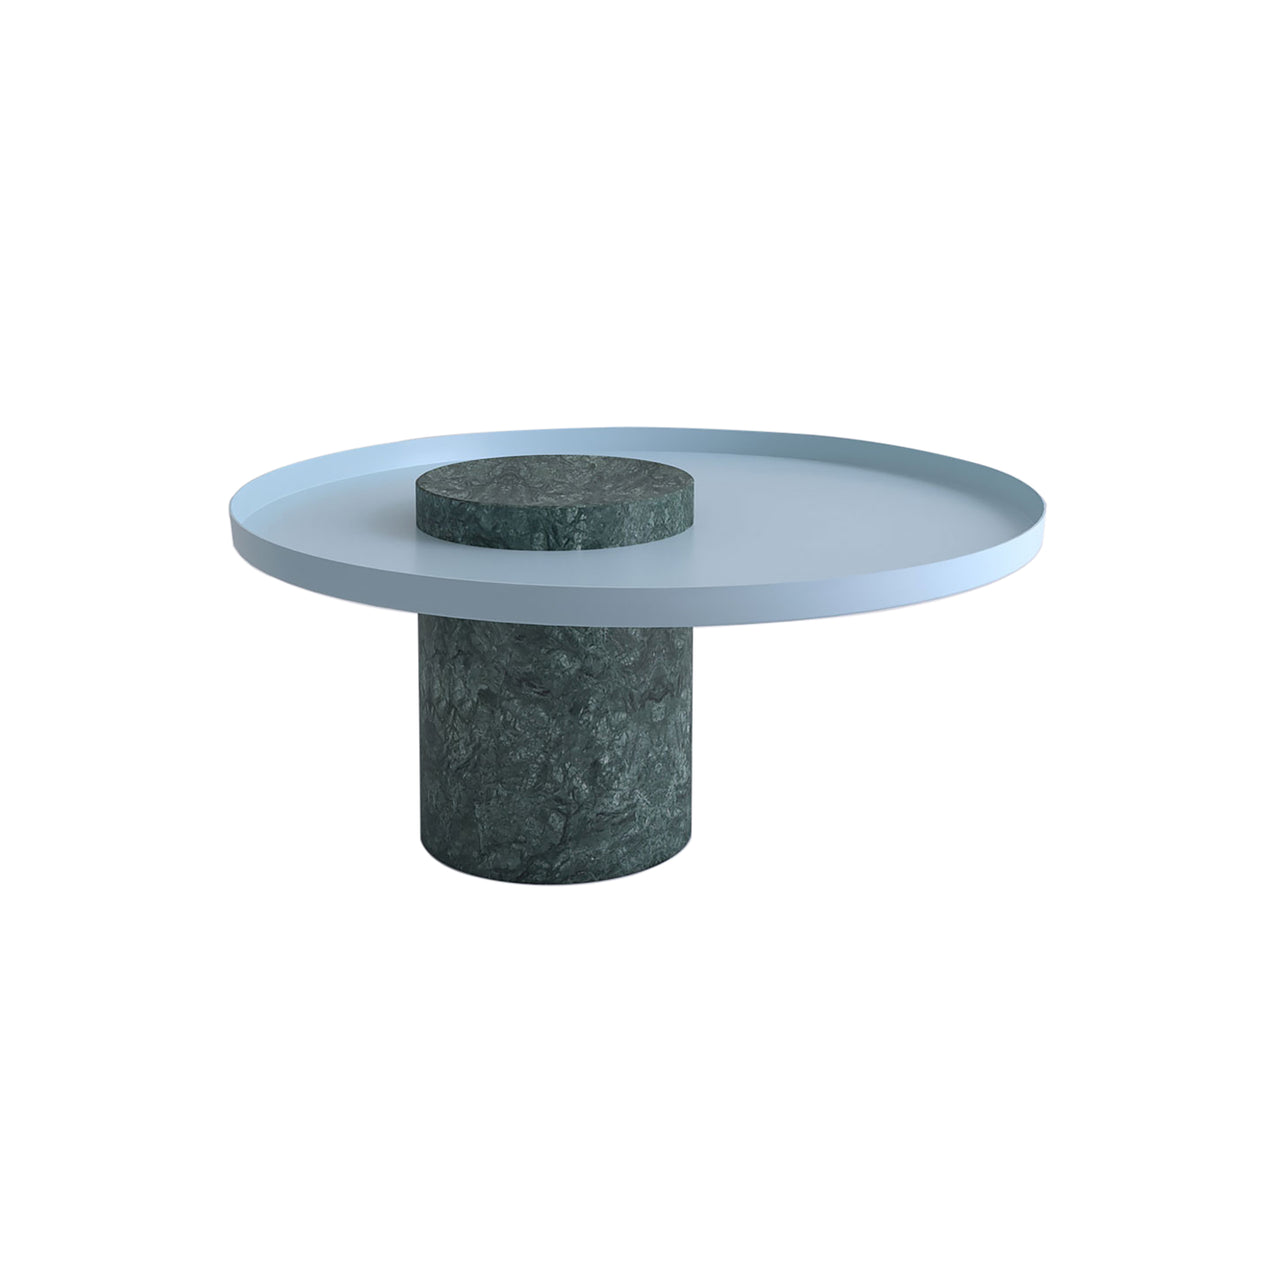 Salute Side Table: Low + Indian Green Marble + Light Blue